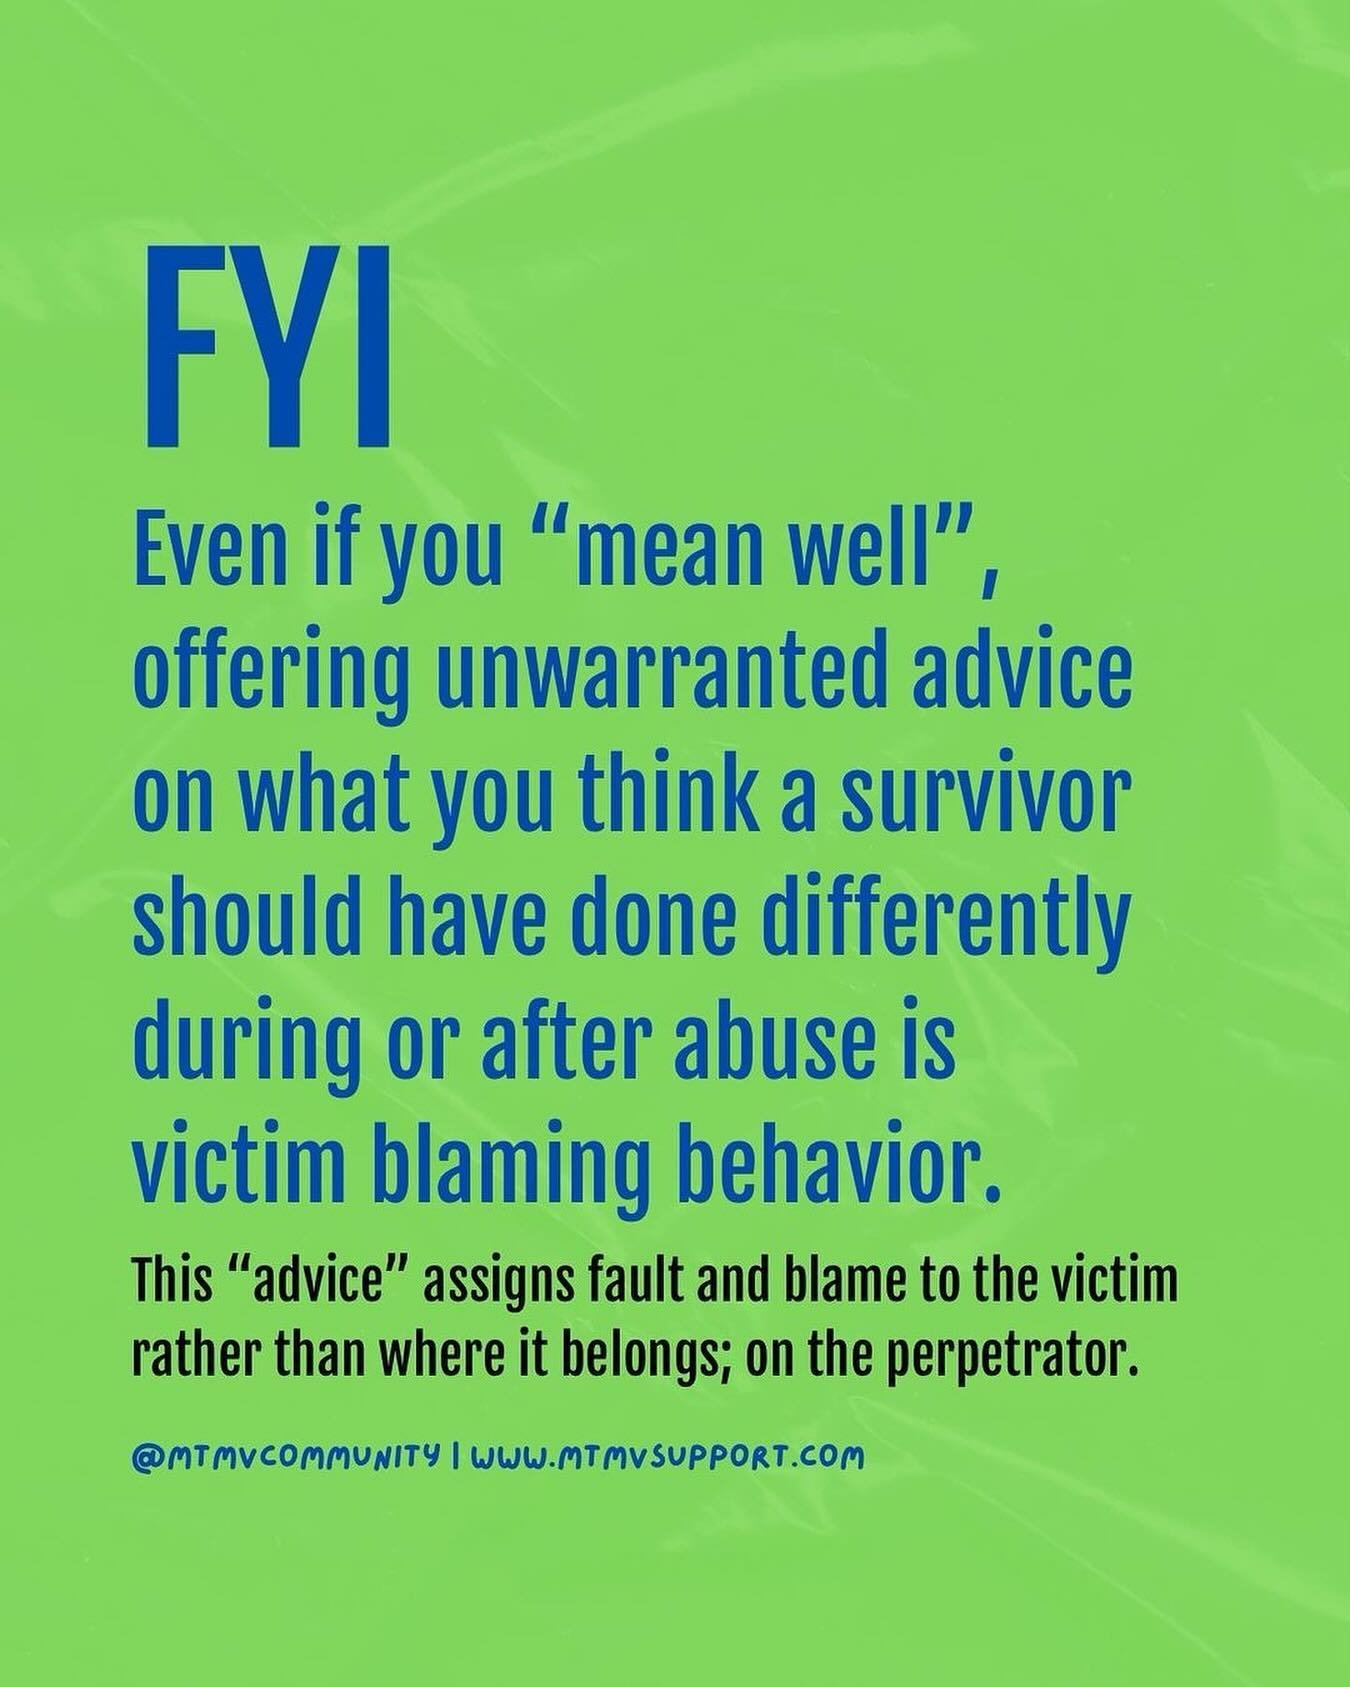 It is never the victim&rsquo;s fault. The harm did not happen because they did or did not do something. Focus on the actions of the perpetrator not the victim/ survivor. There is no shame or blame in anything the survivor had to do to survive. 

[Ima